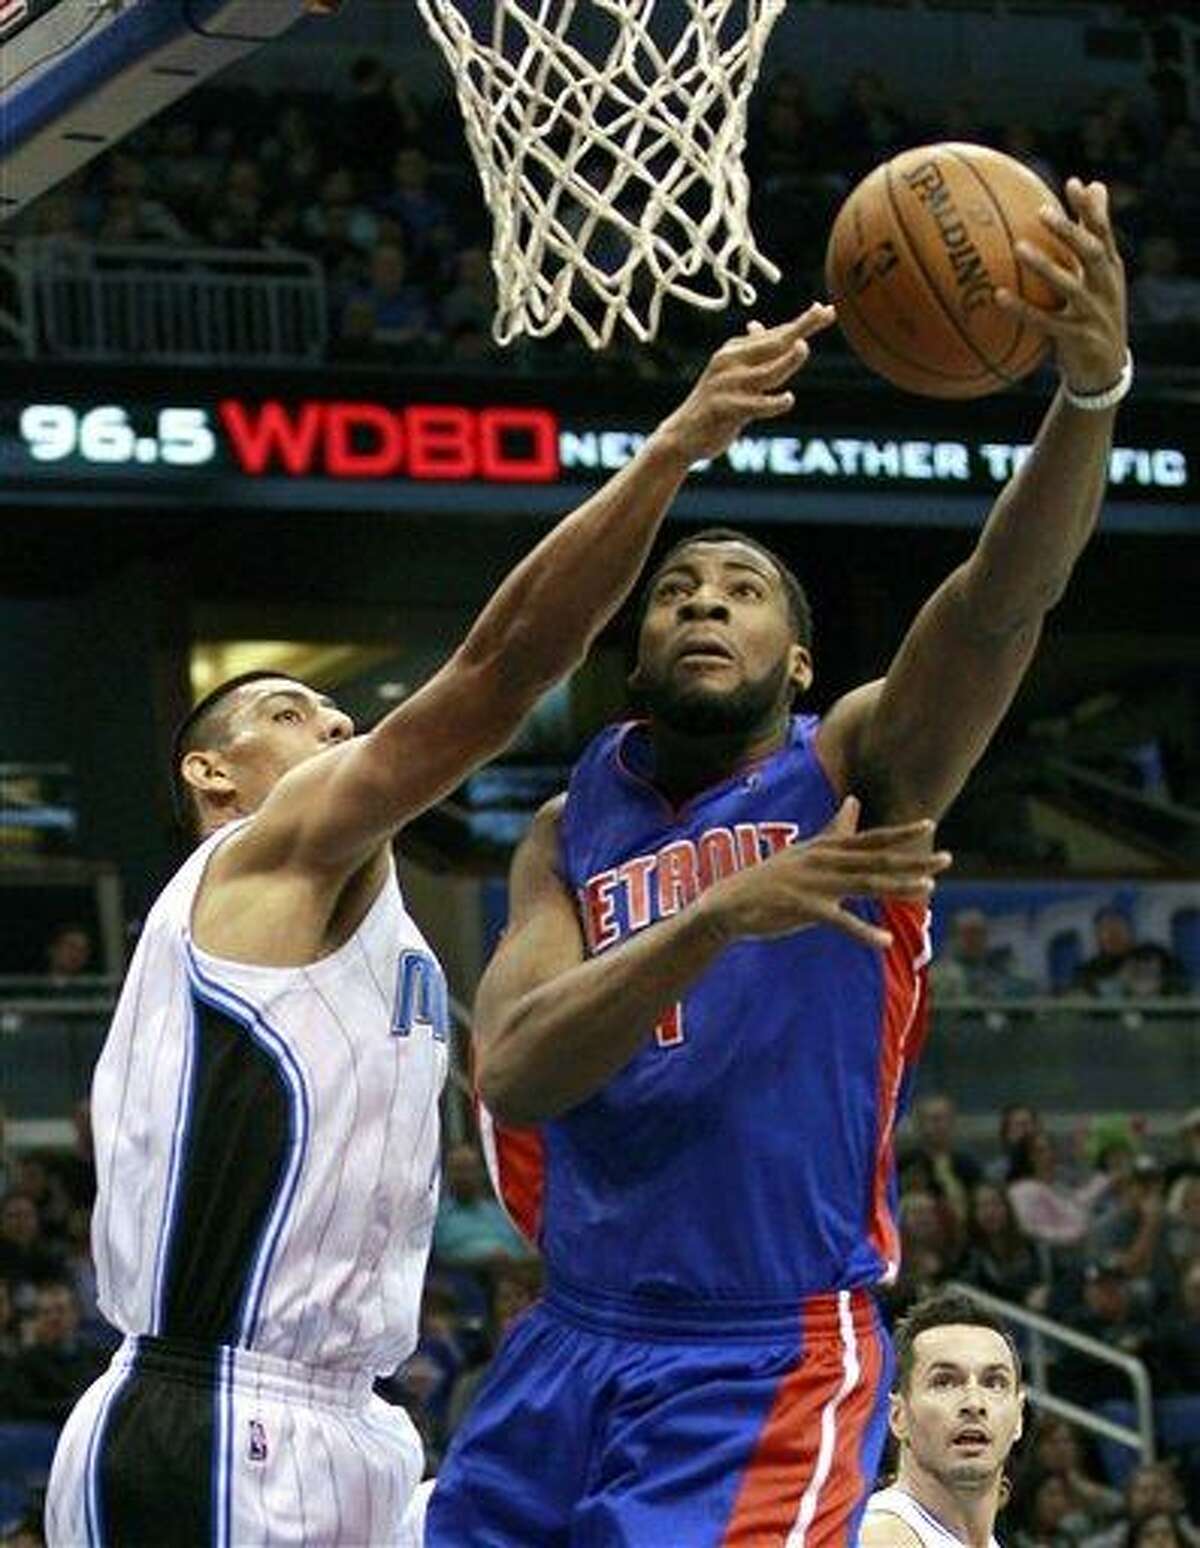 Detroit Pistons' Andre Drummond, right, makes a shot despite defensive effort by Orlando Magic's Gustavo Ayon, left, of Mexico, during the first half of an NBA basketball game, Wednesday, Nov. 21, 2012, in Orlando, Fla. (AP Photo/John Raoux)